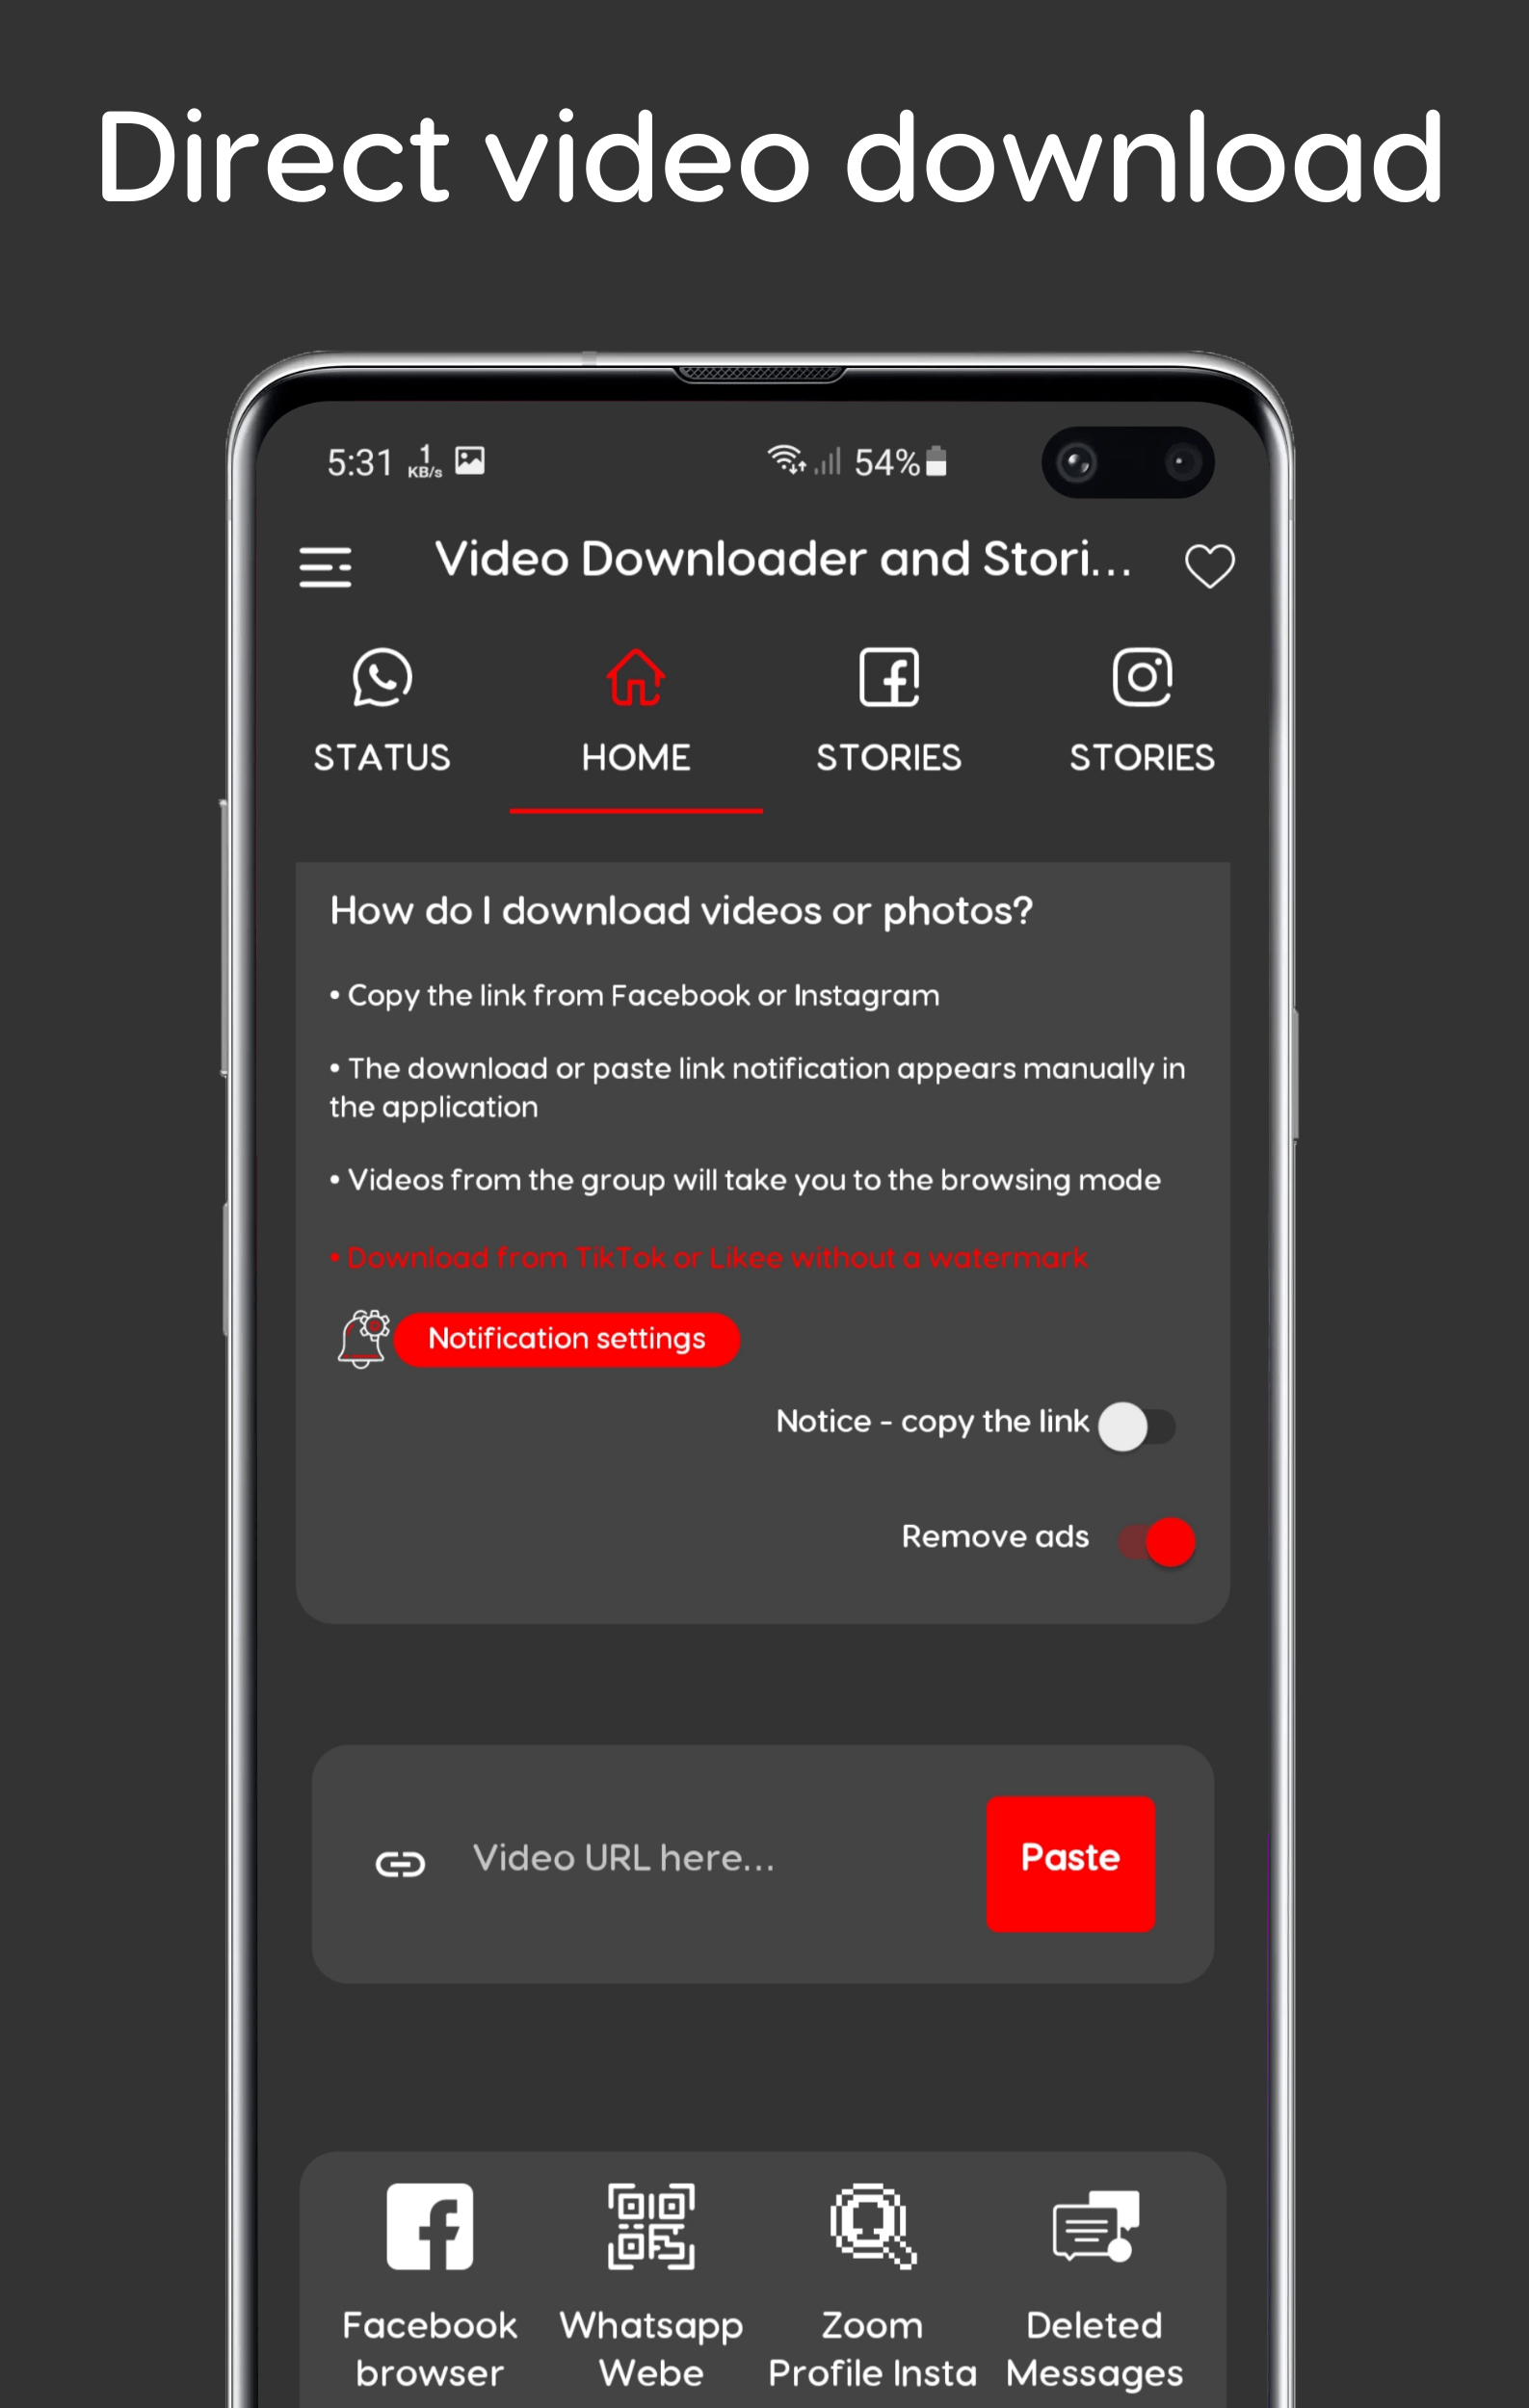 Video-Downloader-and-Stories-1.png